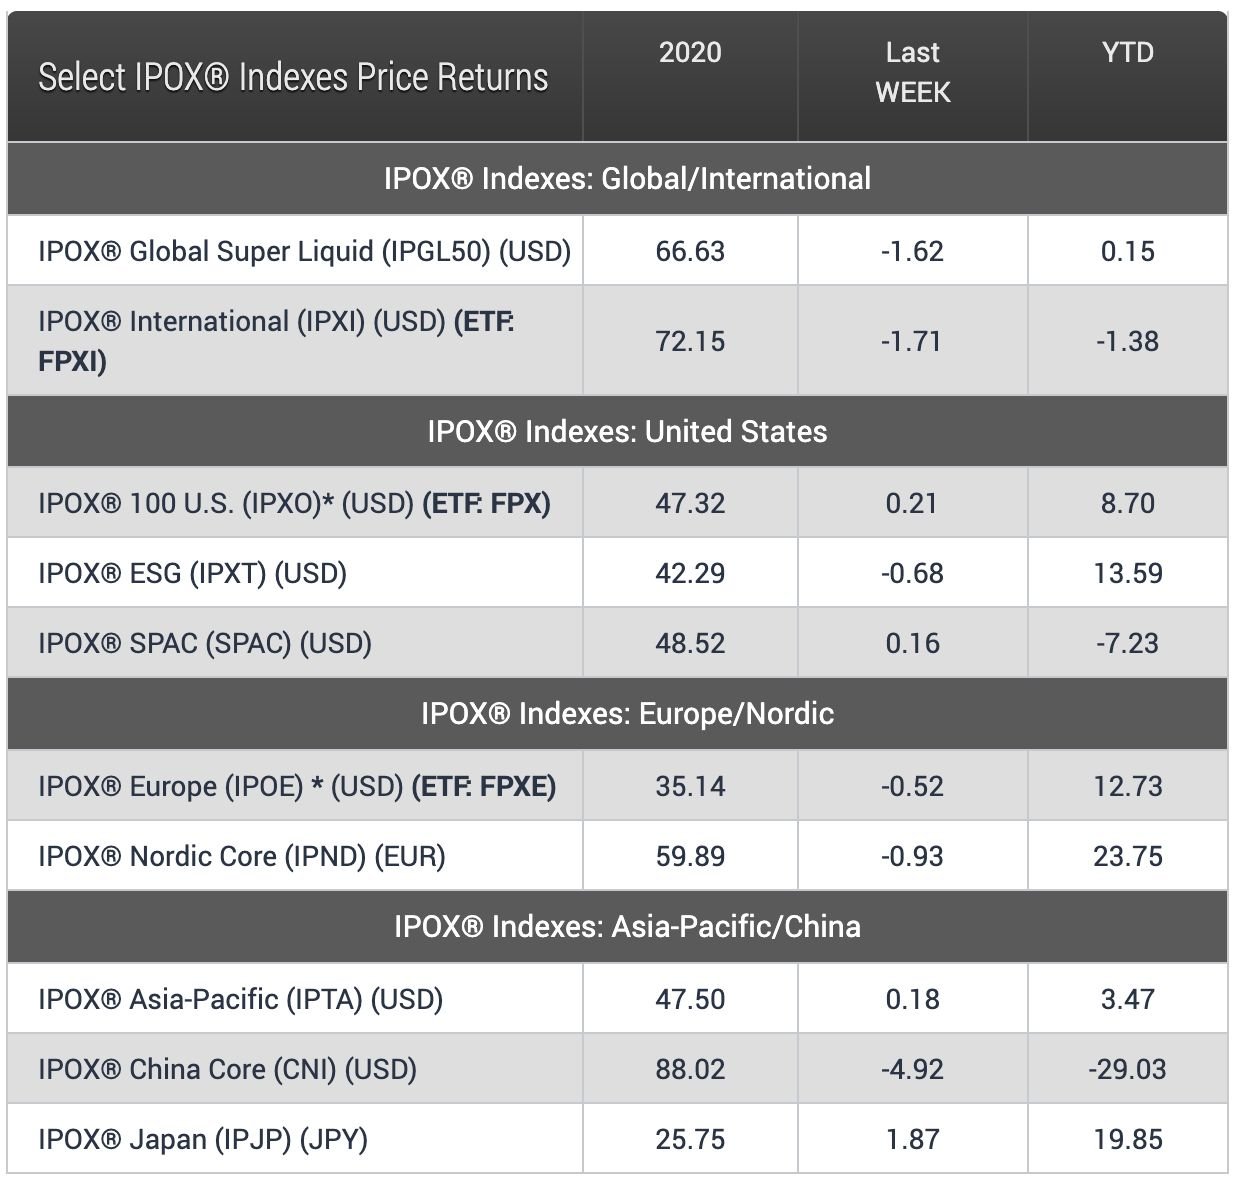 IPOX® 100 Index Performance and End-of-Year Returns (since 1989)